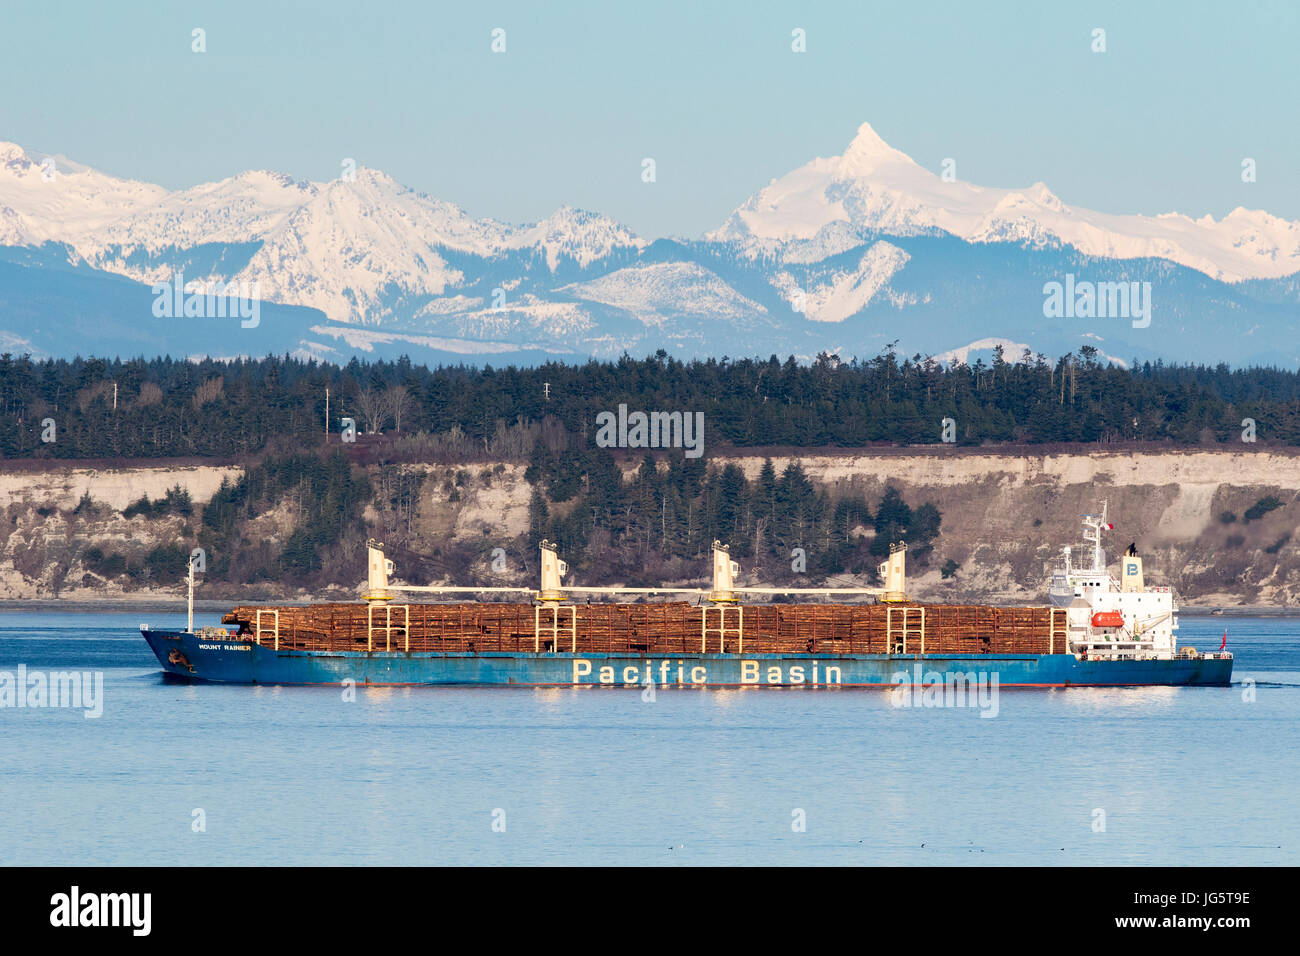 Log ship used for logging passes through Puget Sound, Washington with Cascade Mountains in background. Stock Photo